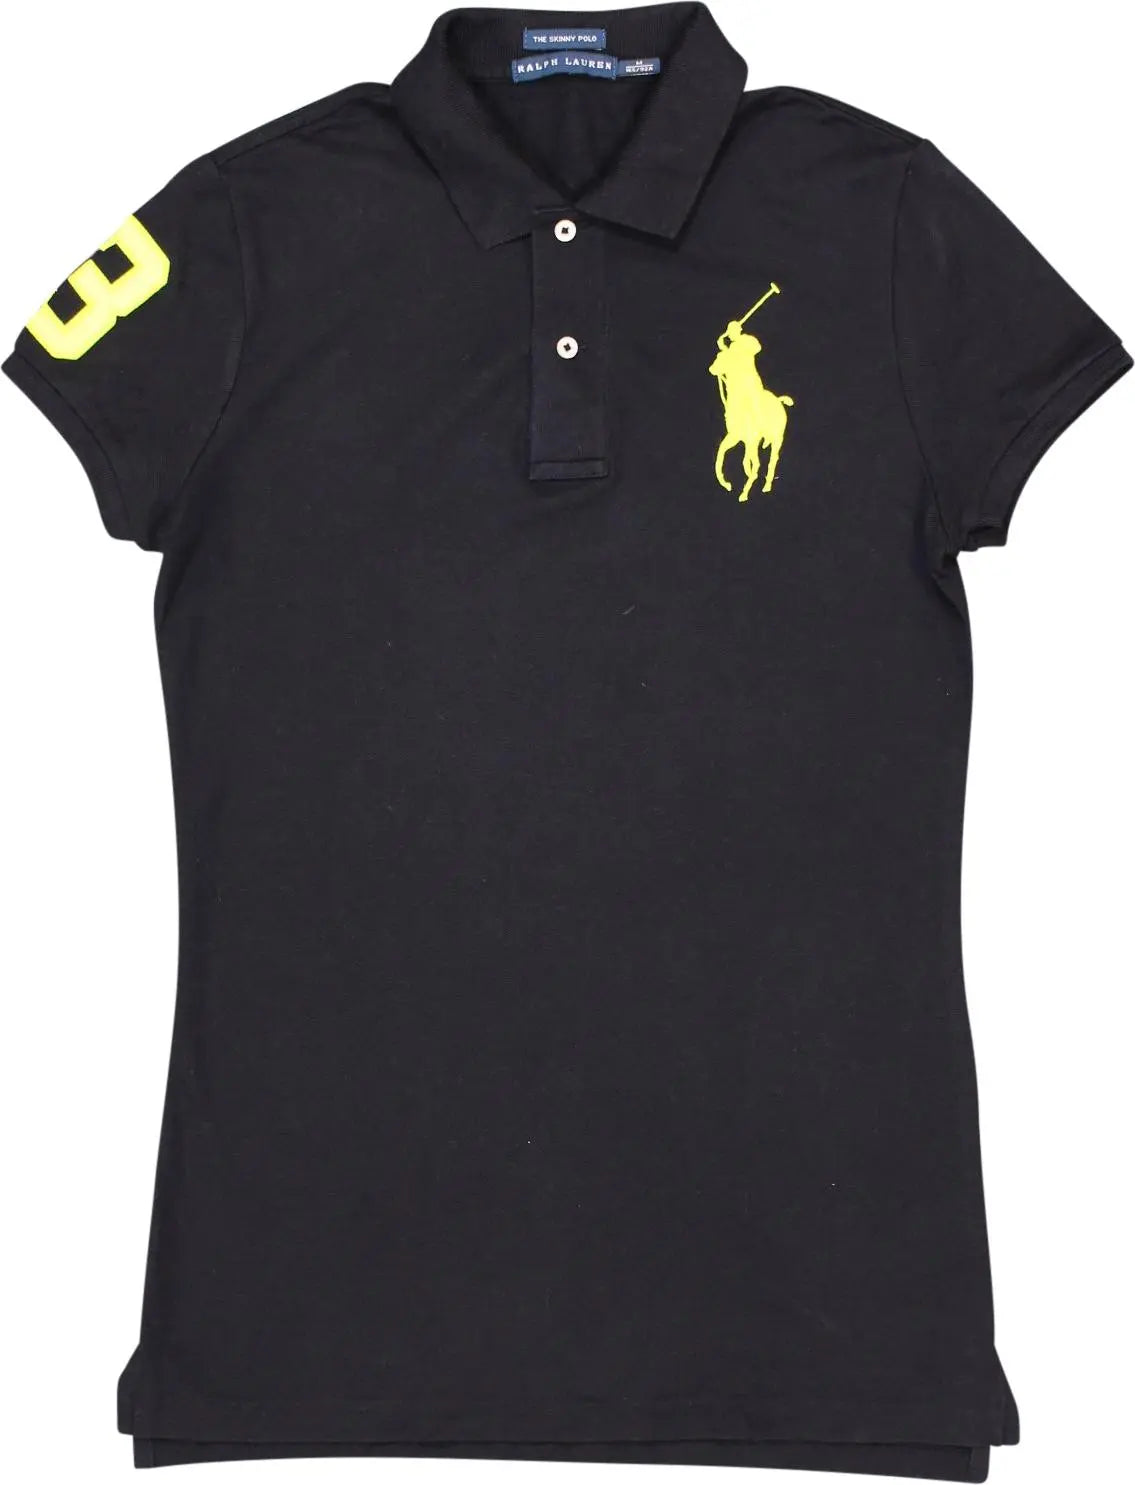 Ralph Lauren - Black Polo Shirt by Ralph Lauren- ThriftTale.com - Vintage and second handclothing